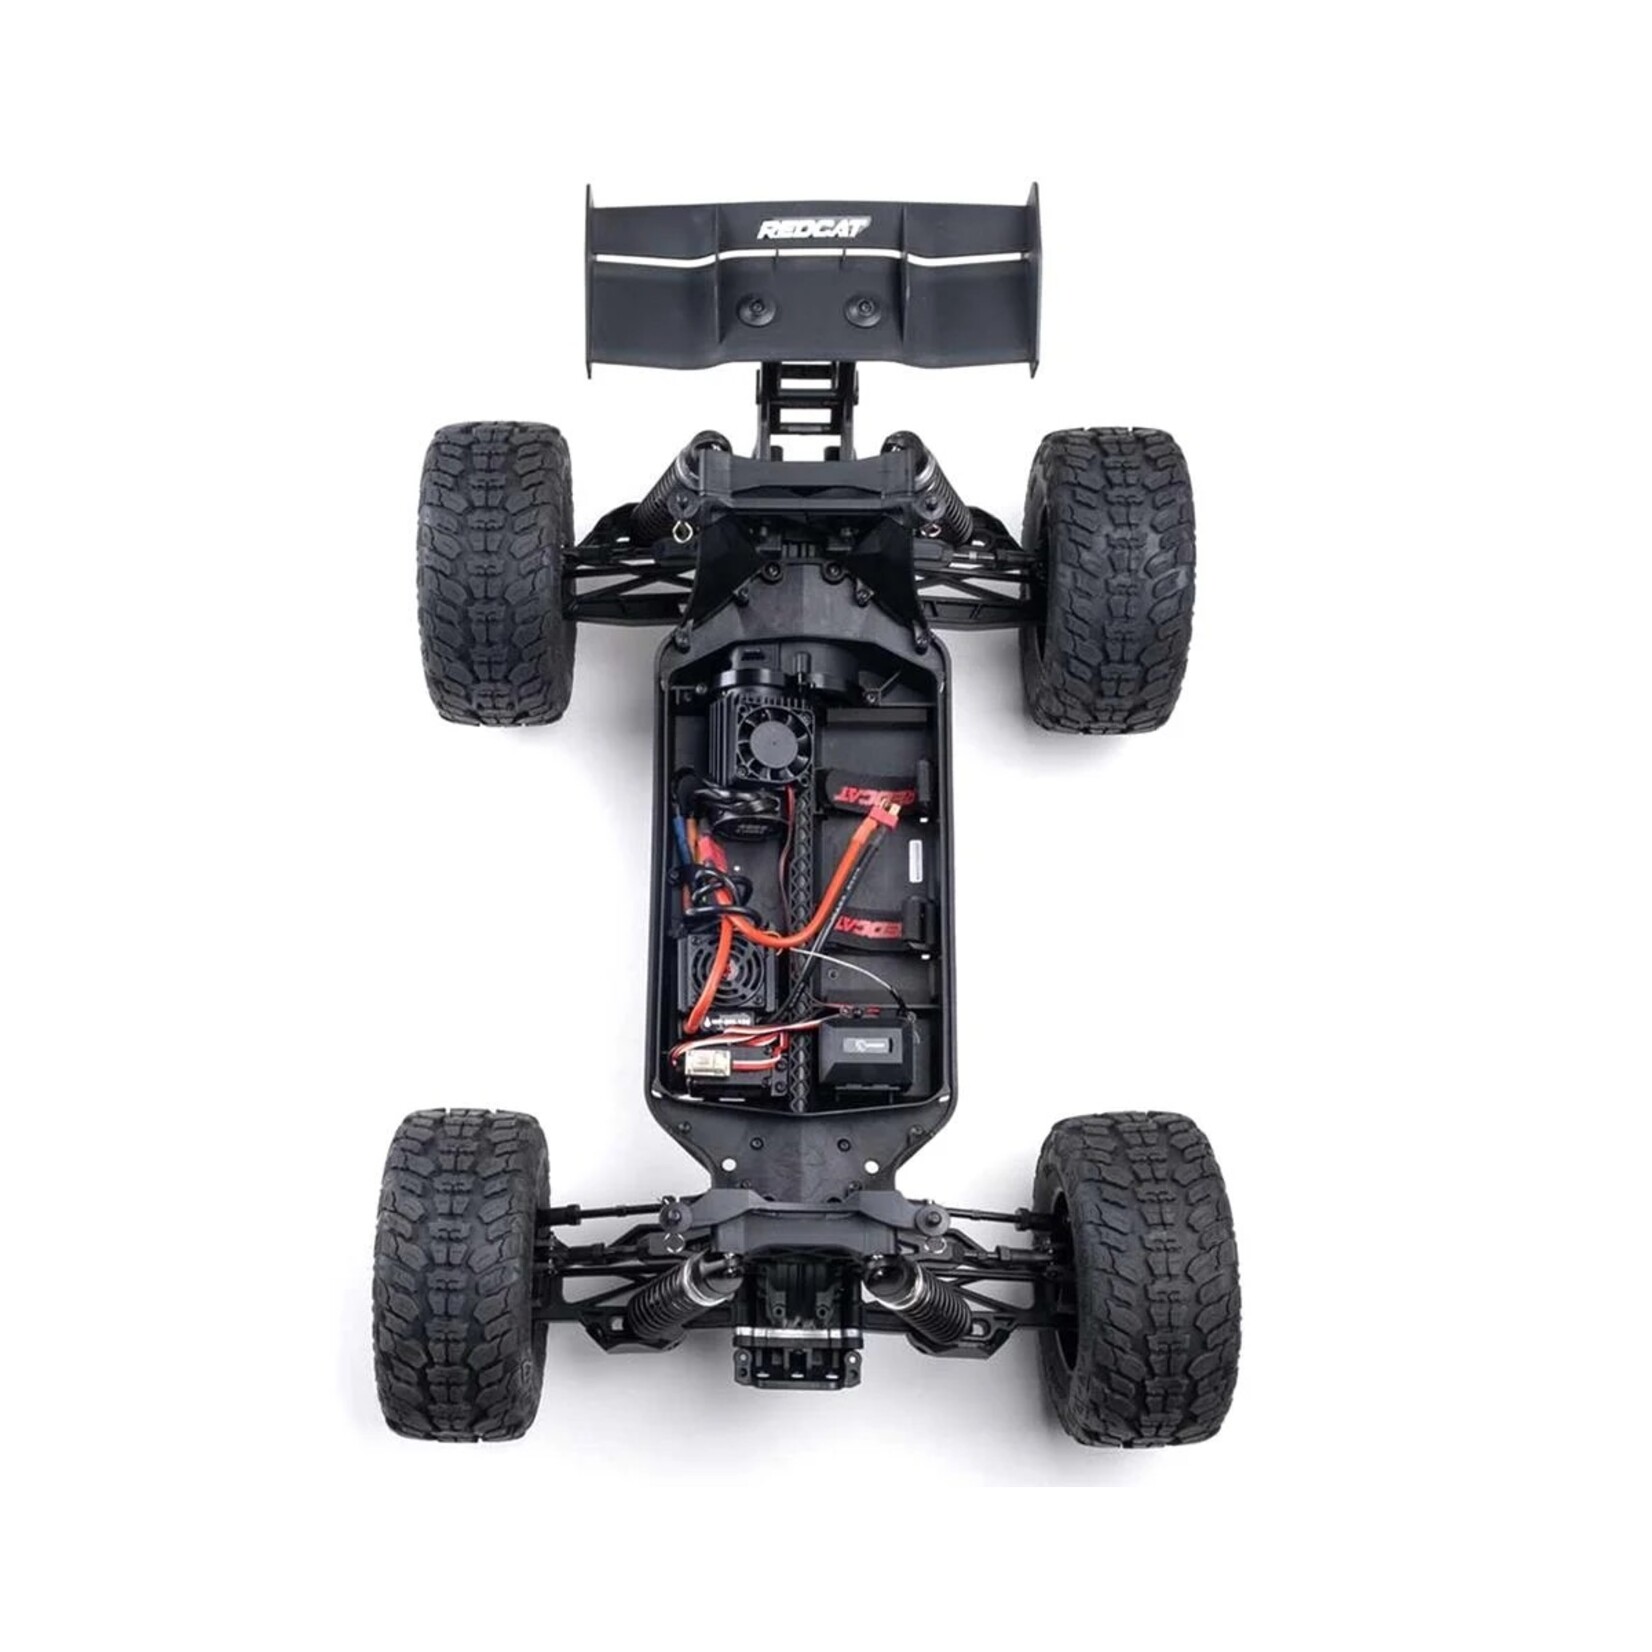 Redcat Racing Redcat Kaiju EXT 1/8 RTR 4WD 6S Brushless Monster Truck (Copper) w/2.4GHz Radio #RER14656